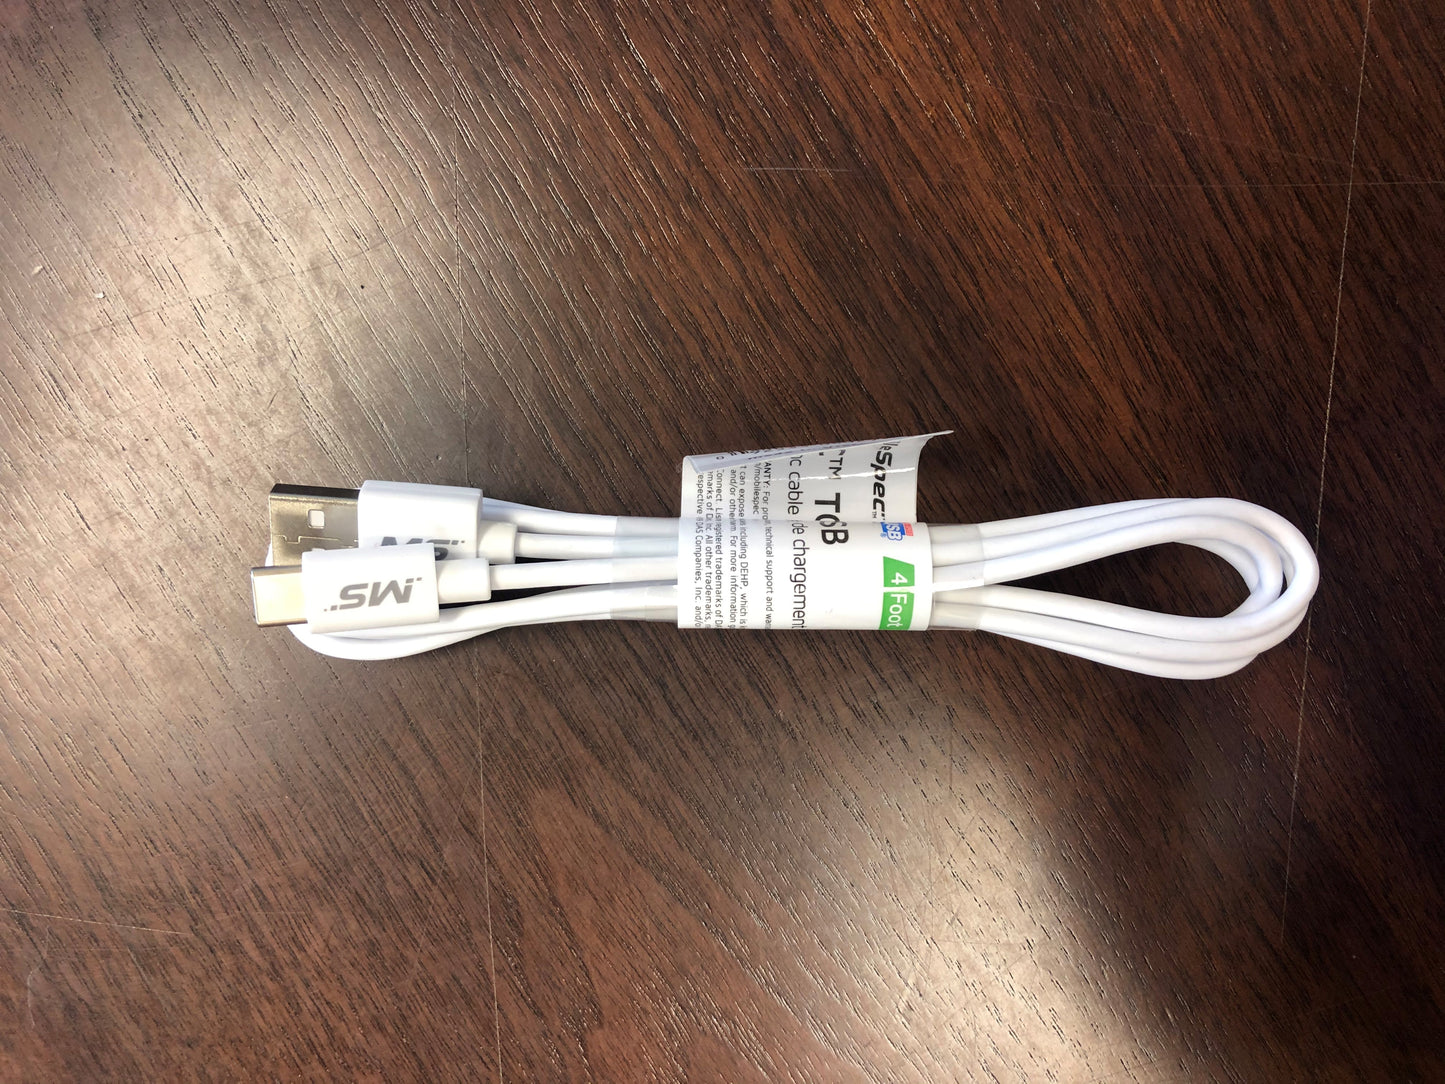 ITEM NUMBER 050058 MBS USB C TO USB 4FT WHT CABLE  24 PIECES PER PACK